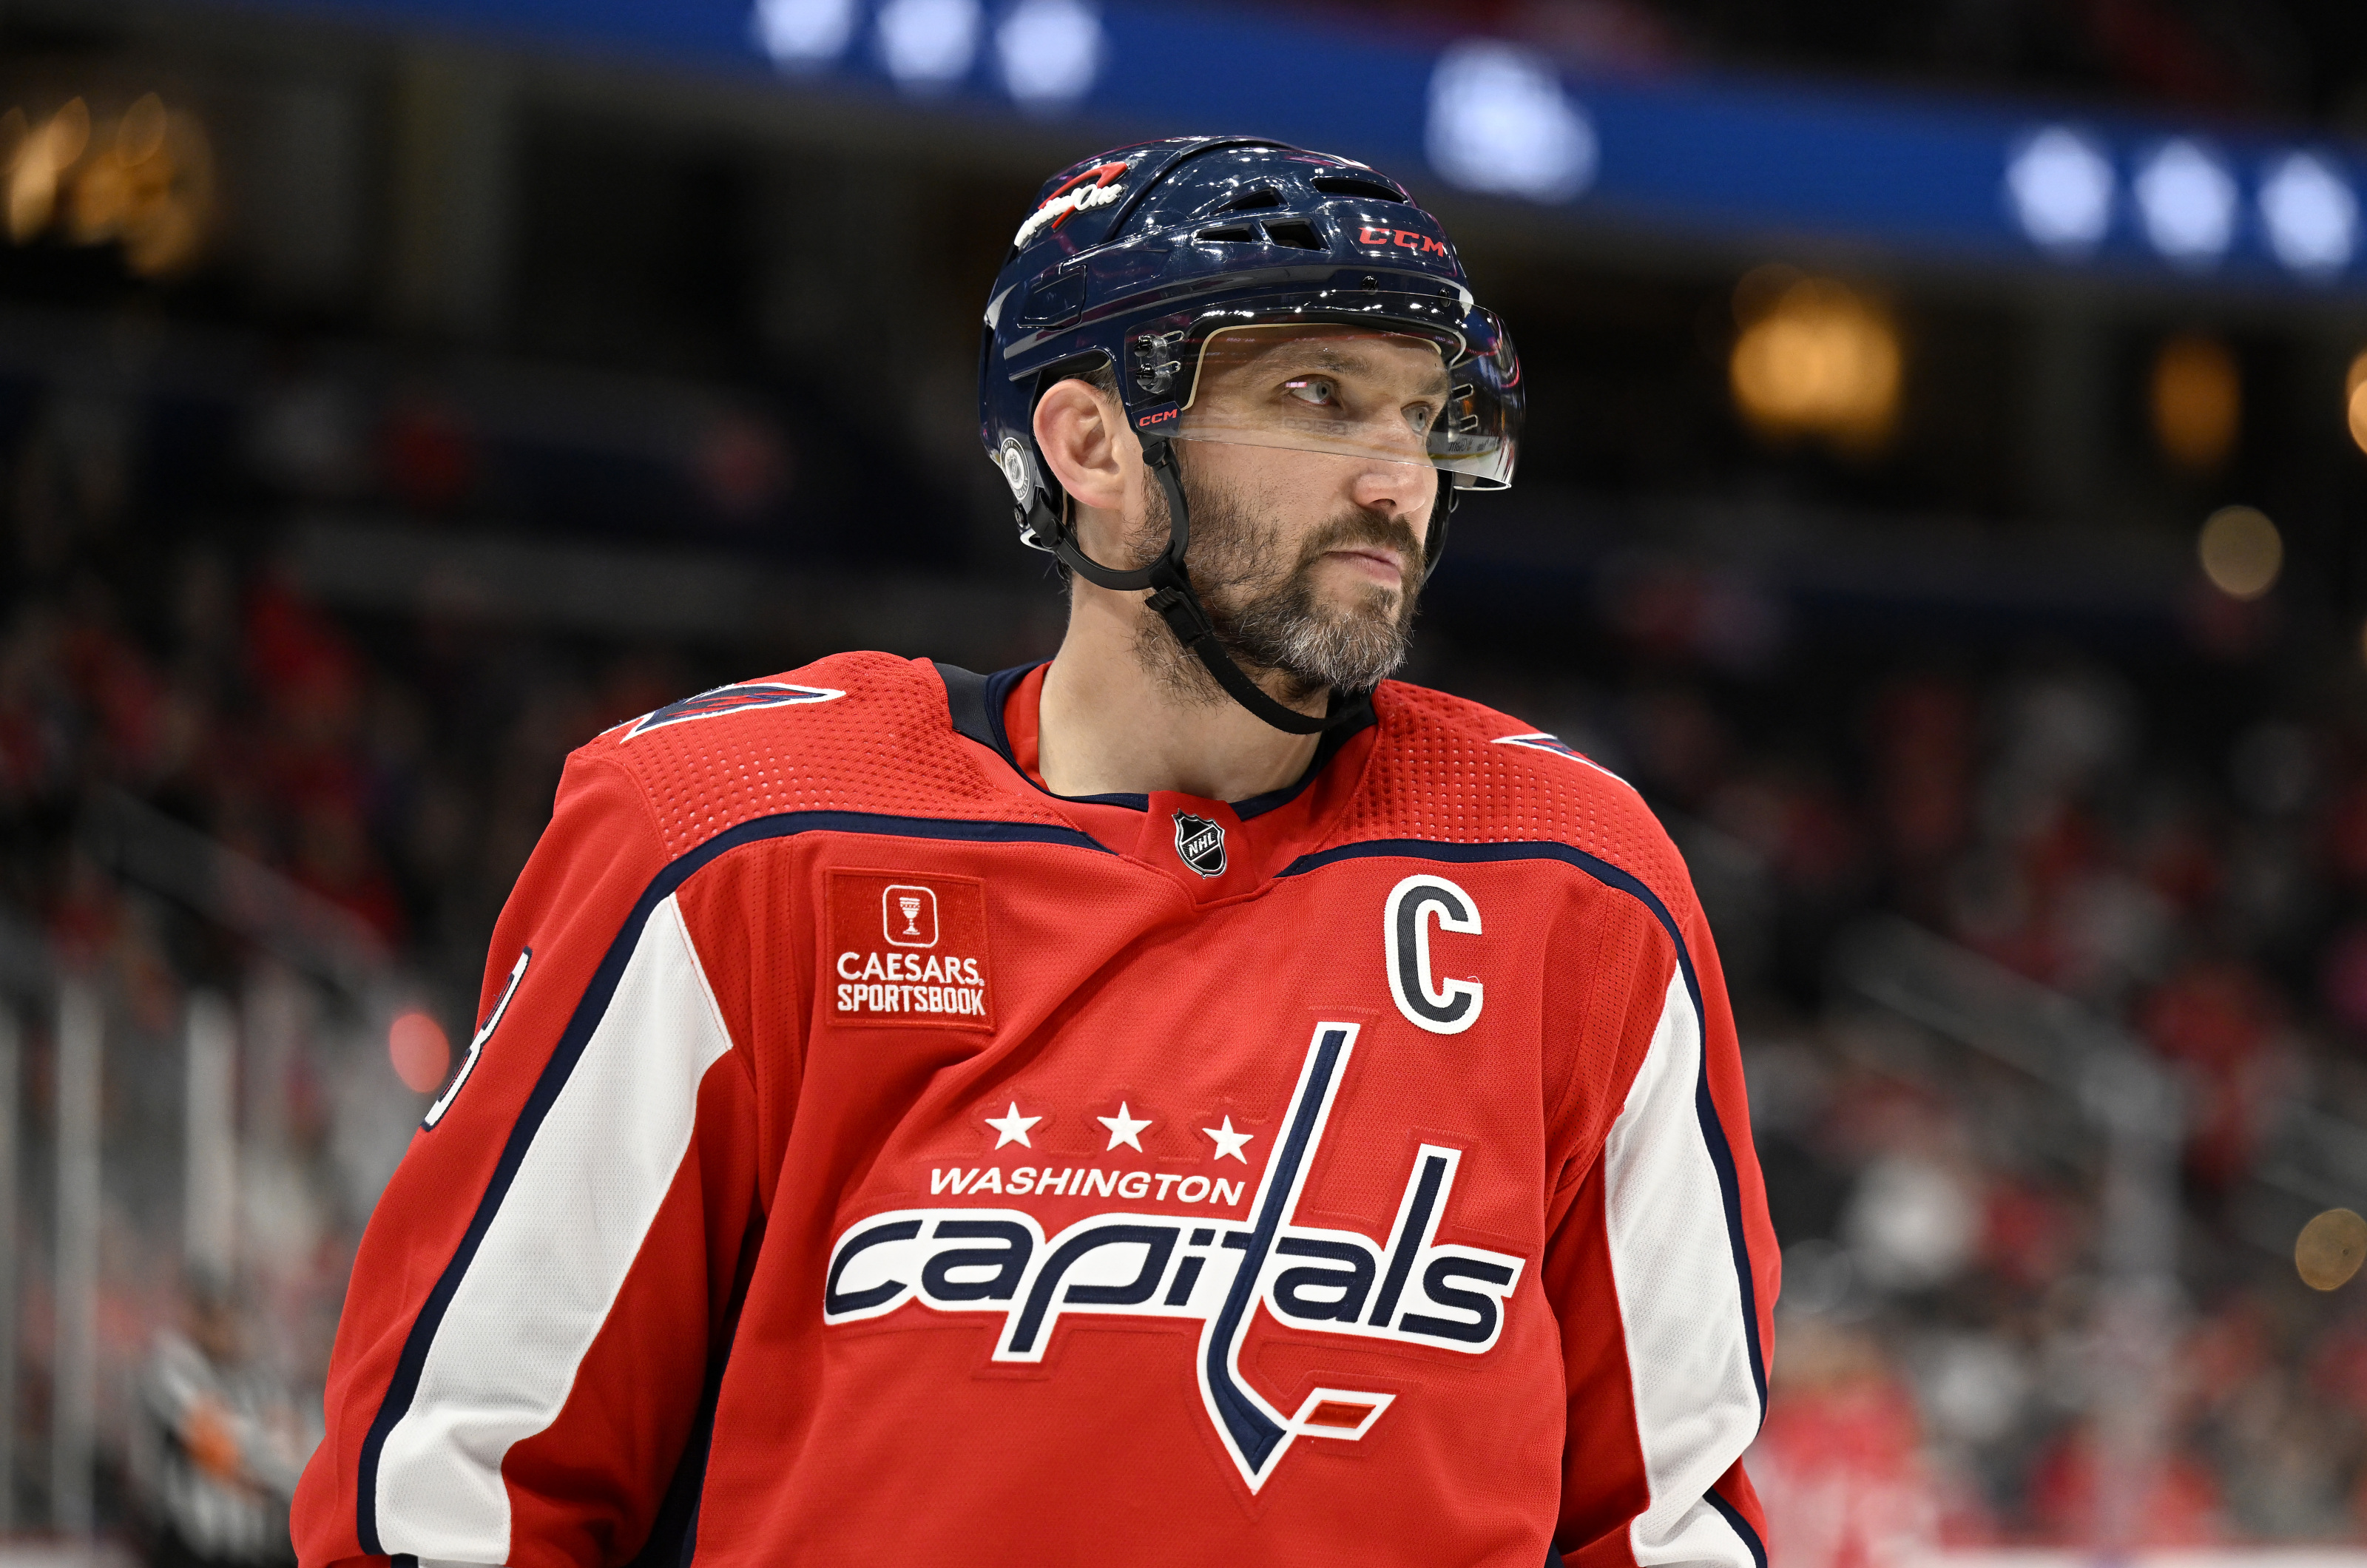 Ovechkin at 800 now chasing Howe for 2nd on NHL goals list